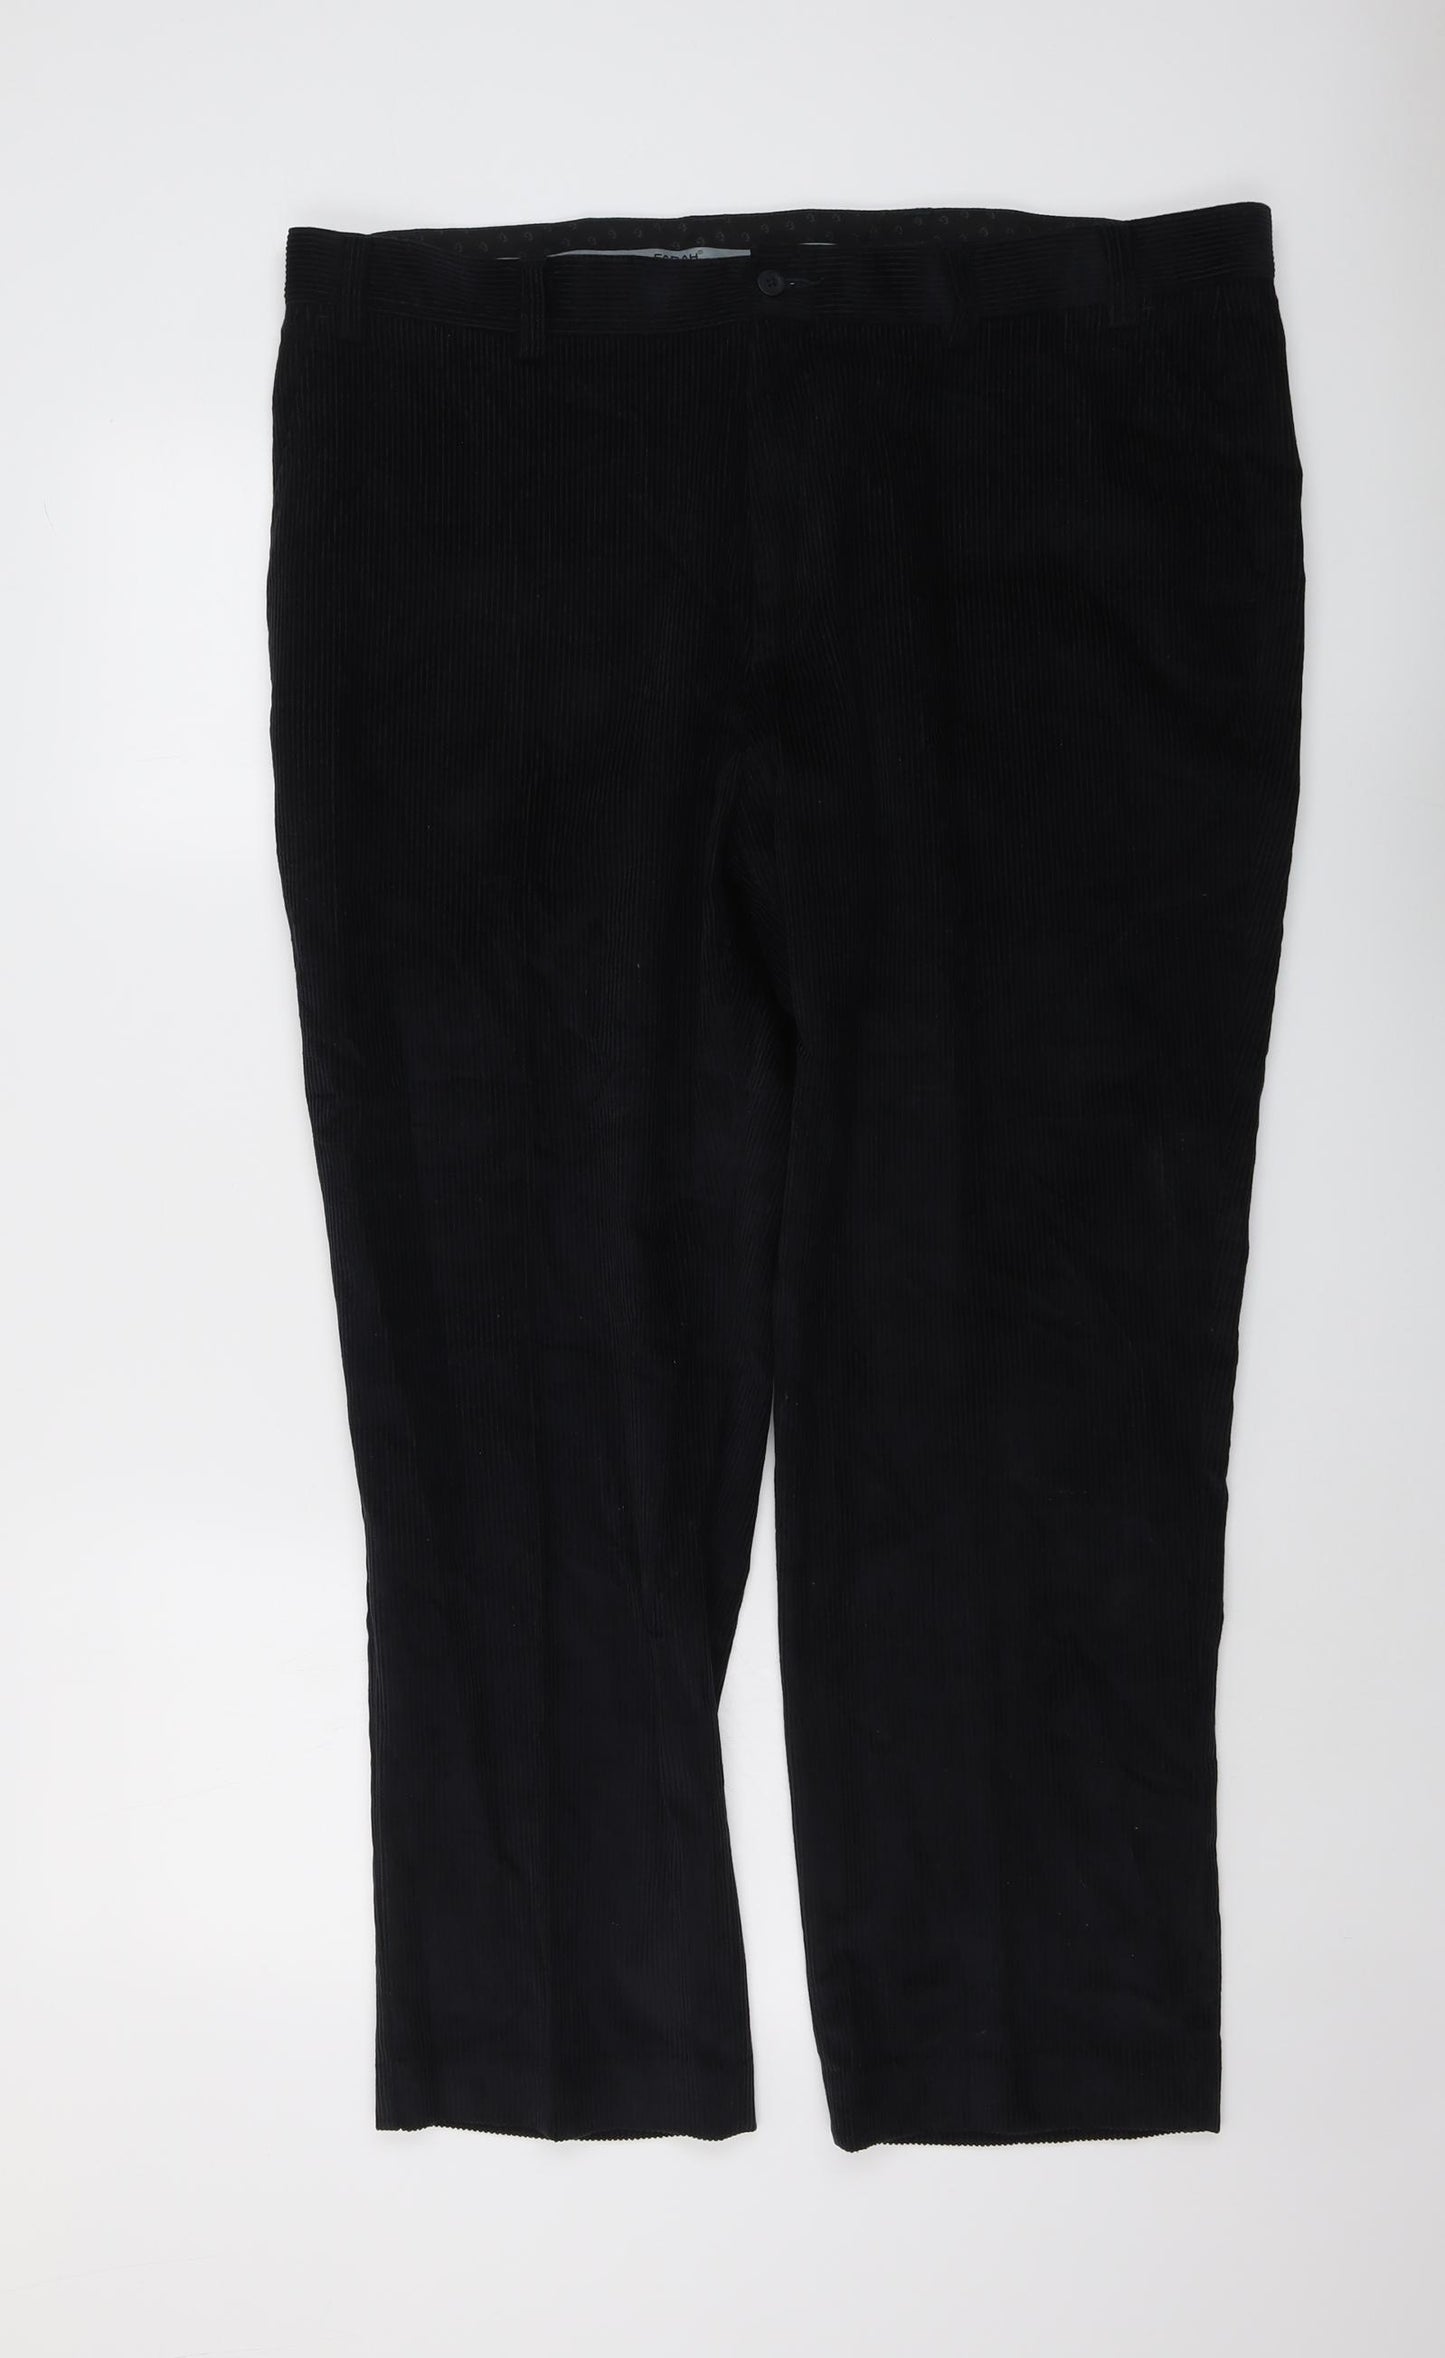 Farah Mens Blue Cotton Trousers Size 42 in L29 in Regular Button